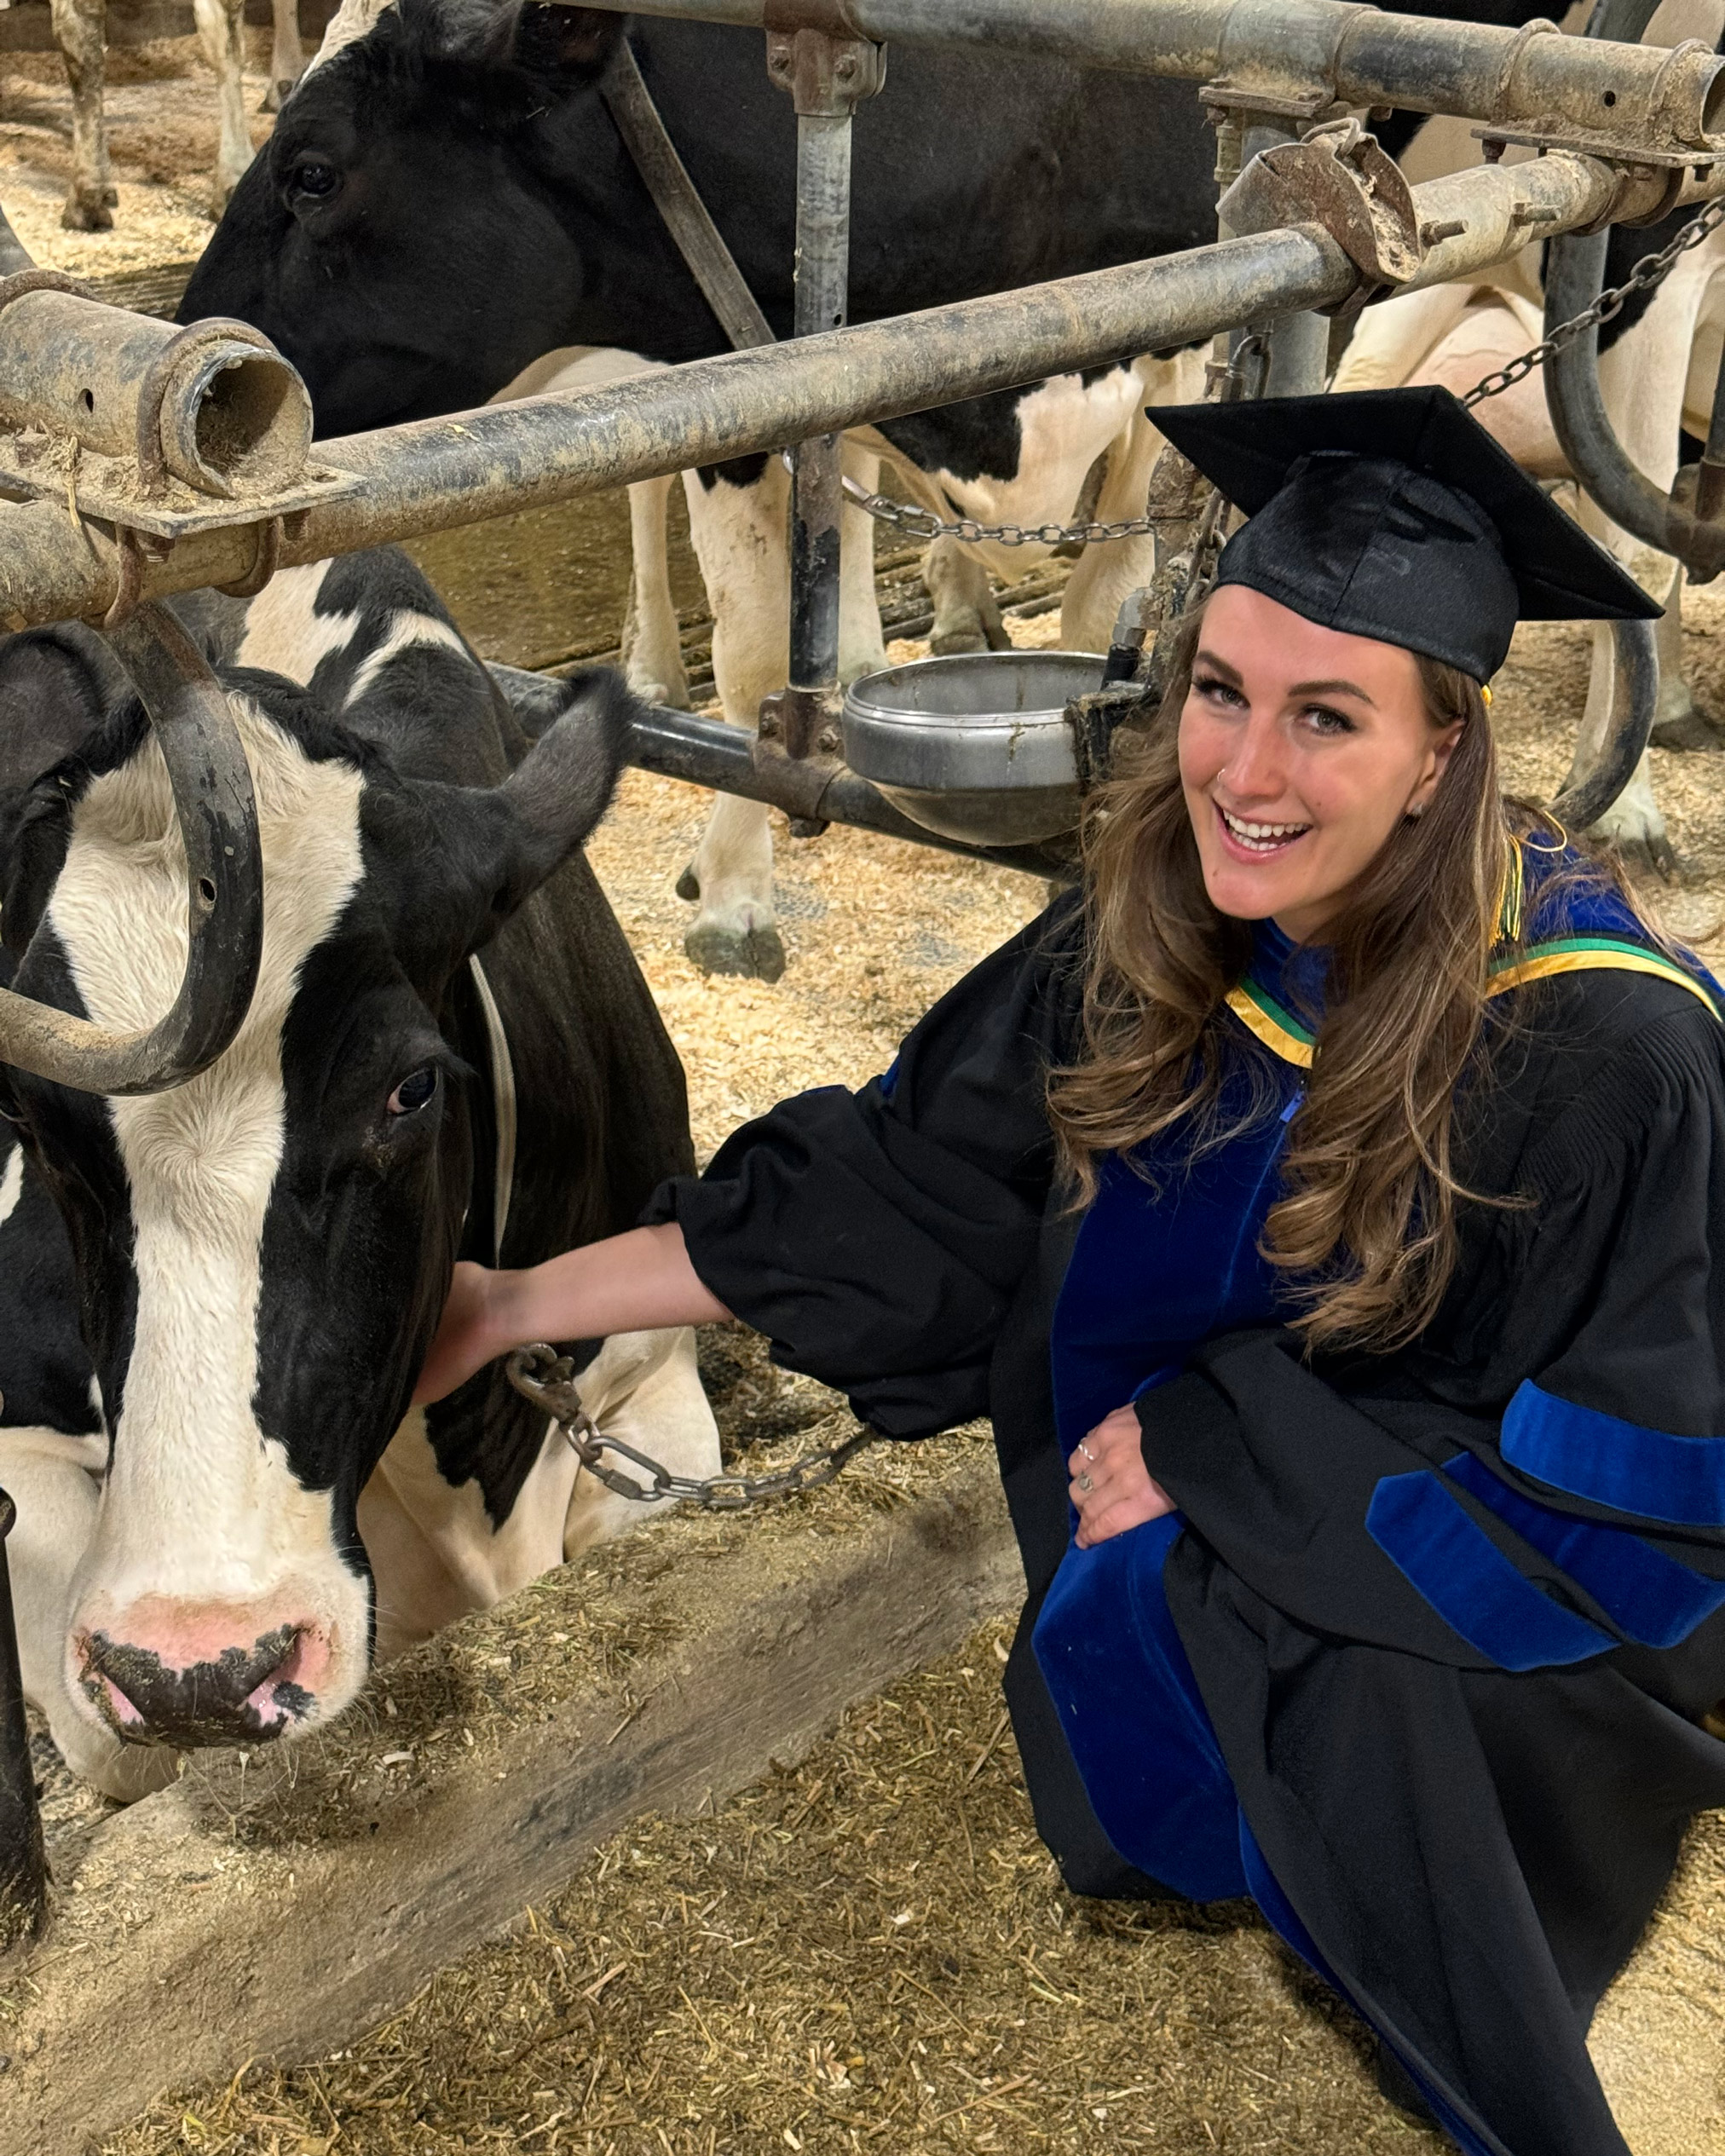 lauren pets a cow dressed in convocation garb, including a cloak and motorboard hat